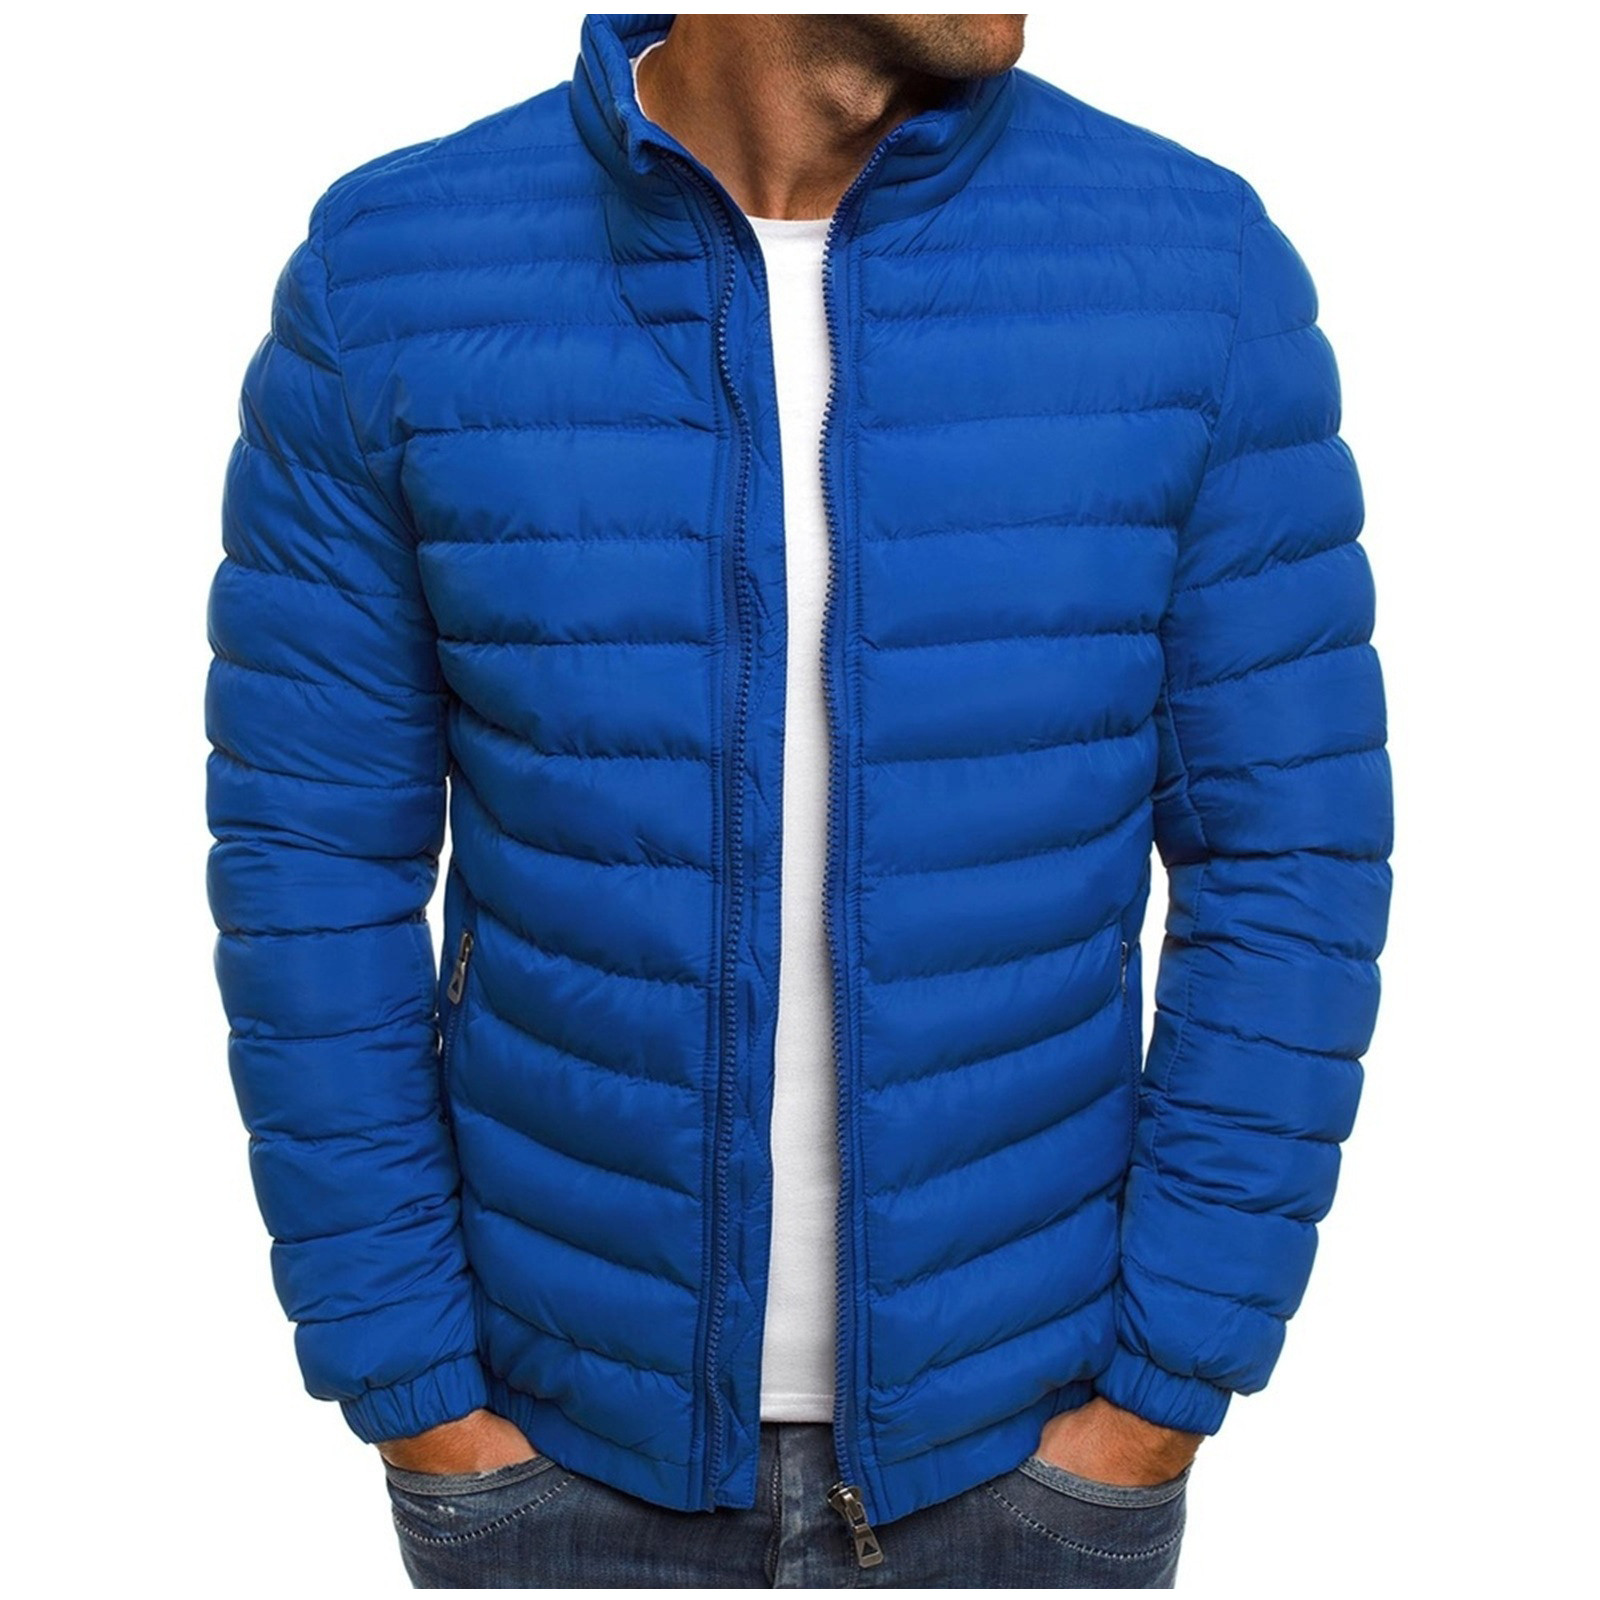 TIHLMK Down Jacket Sales Clearance Men's Solid Color Jacket Cotton Padded Jacket Fashion Cotton Padded Jacket Men's Warm Cotton Padded Jacket Blue - image 1 of 3